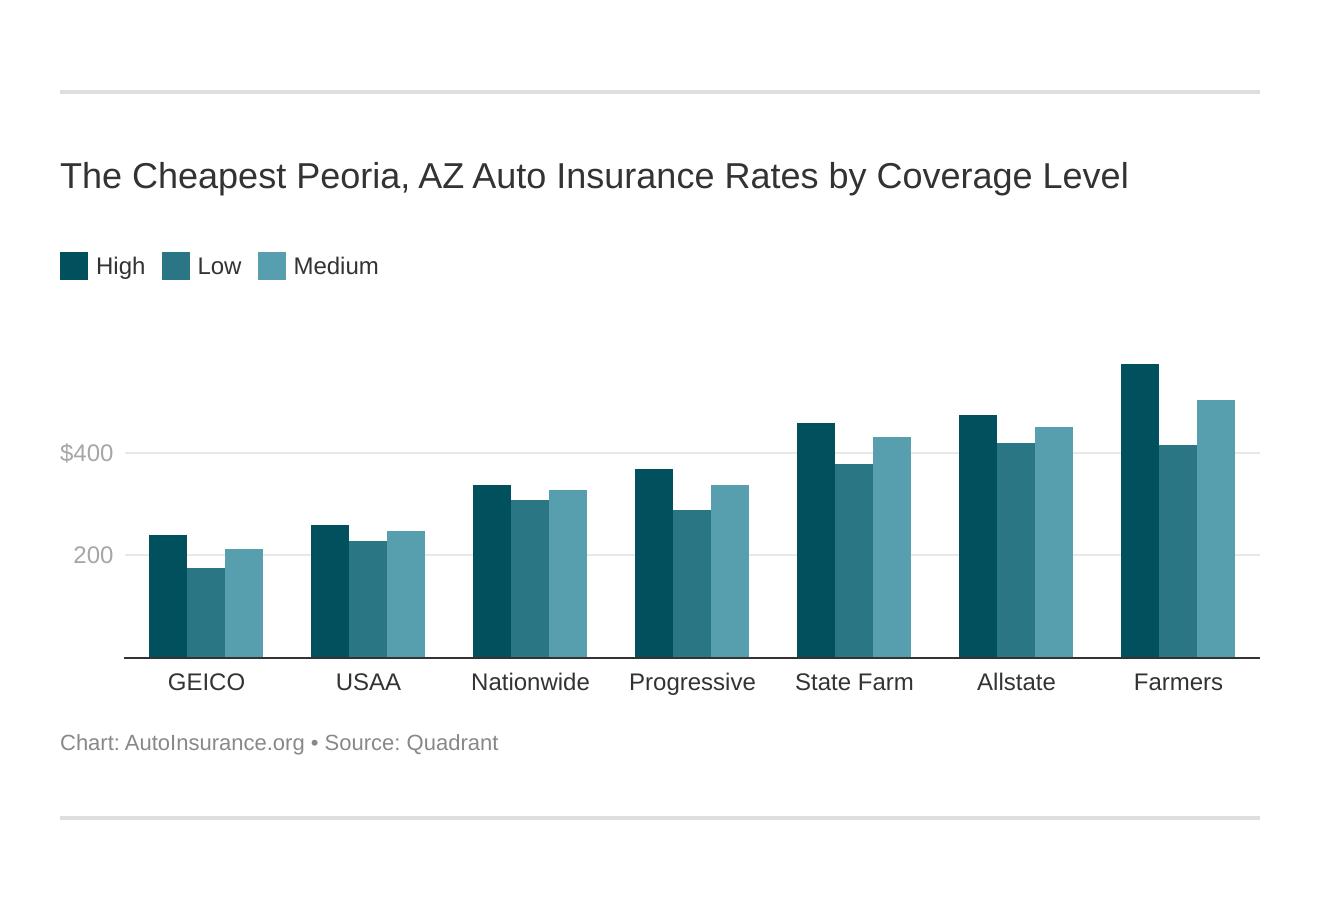 The Cheapest Peoria, AZ Auto Insurance Rates by Coverage Level